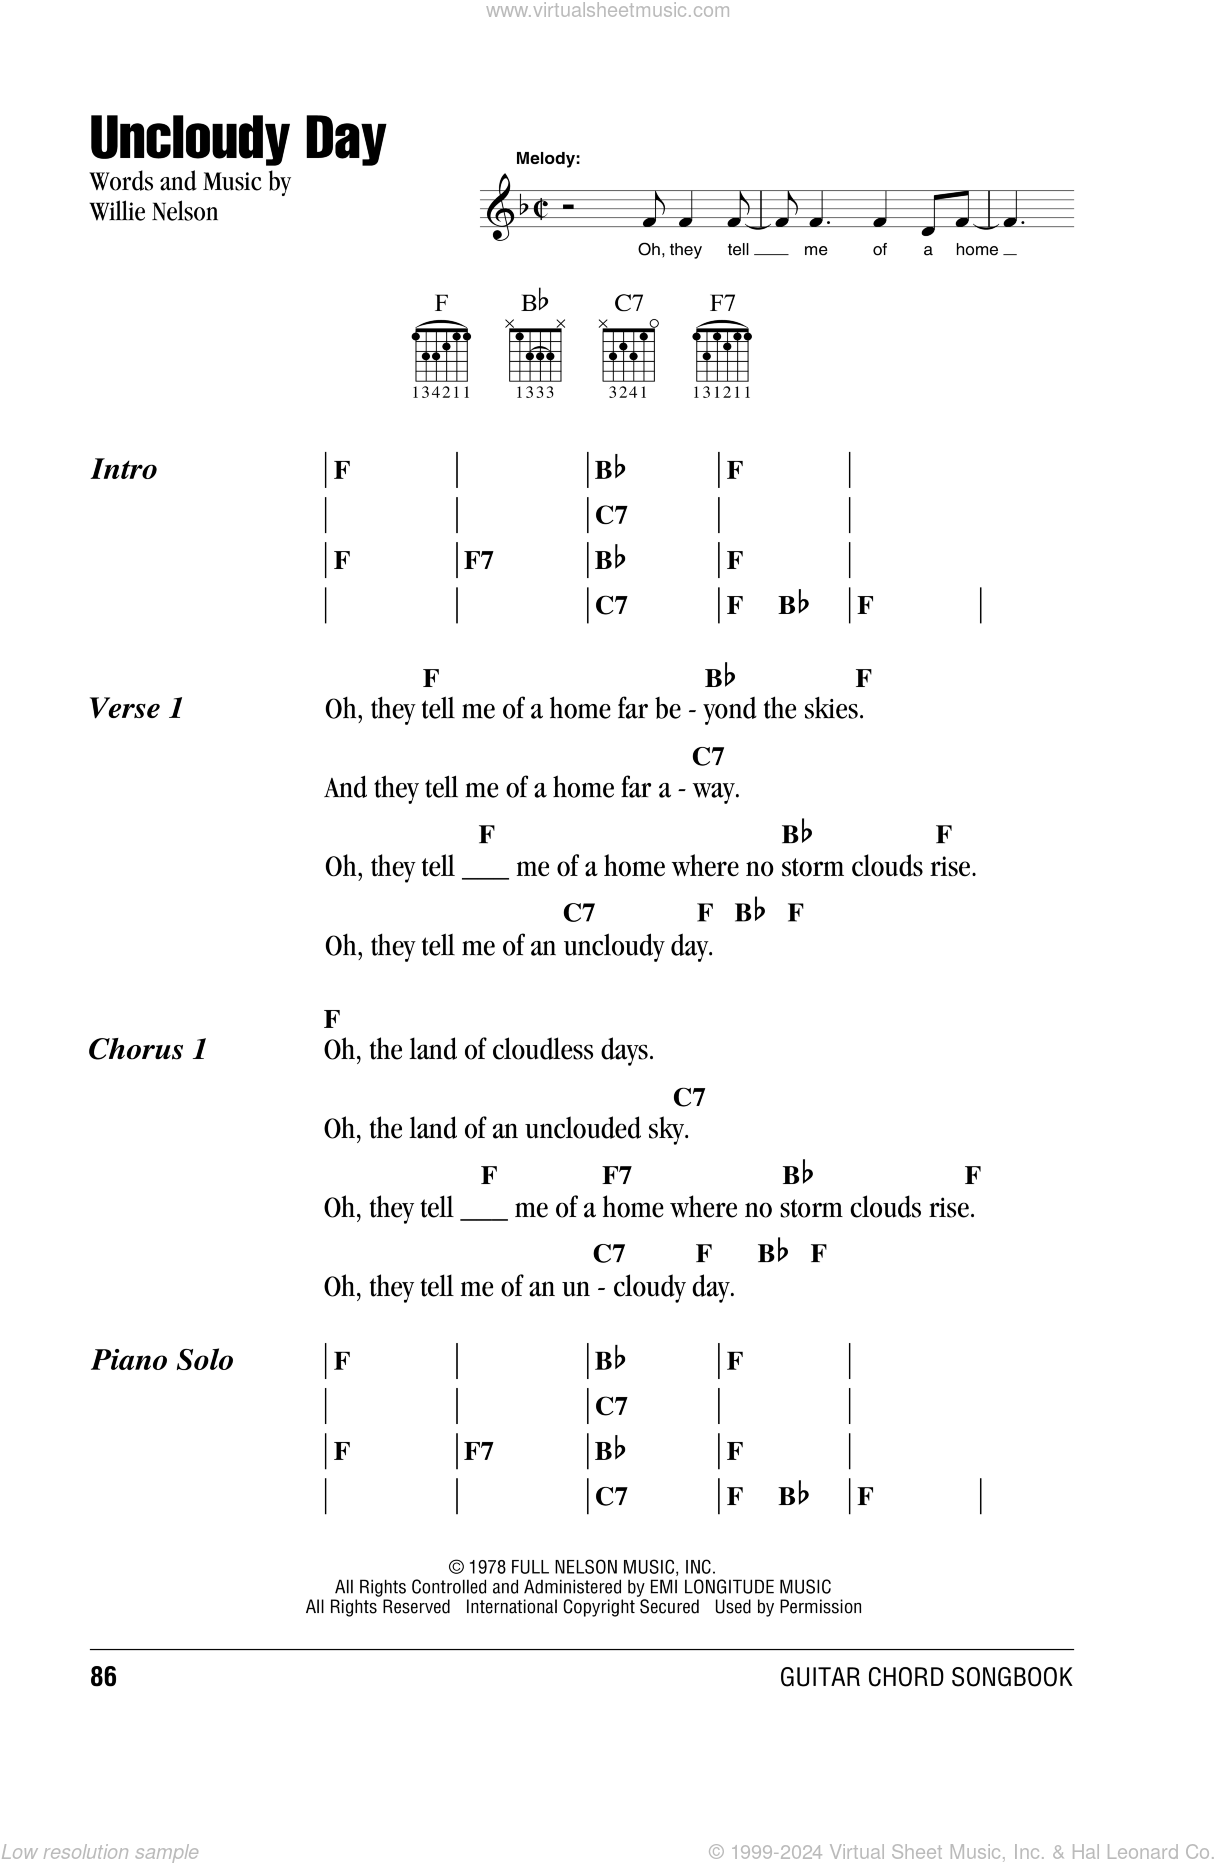 on this day guitar chords